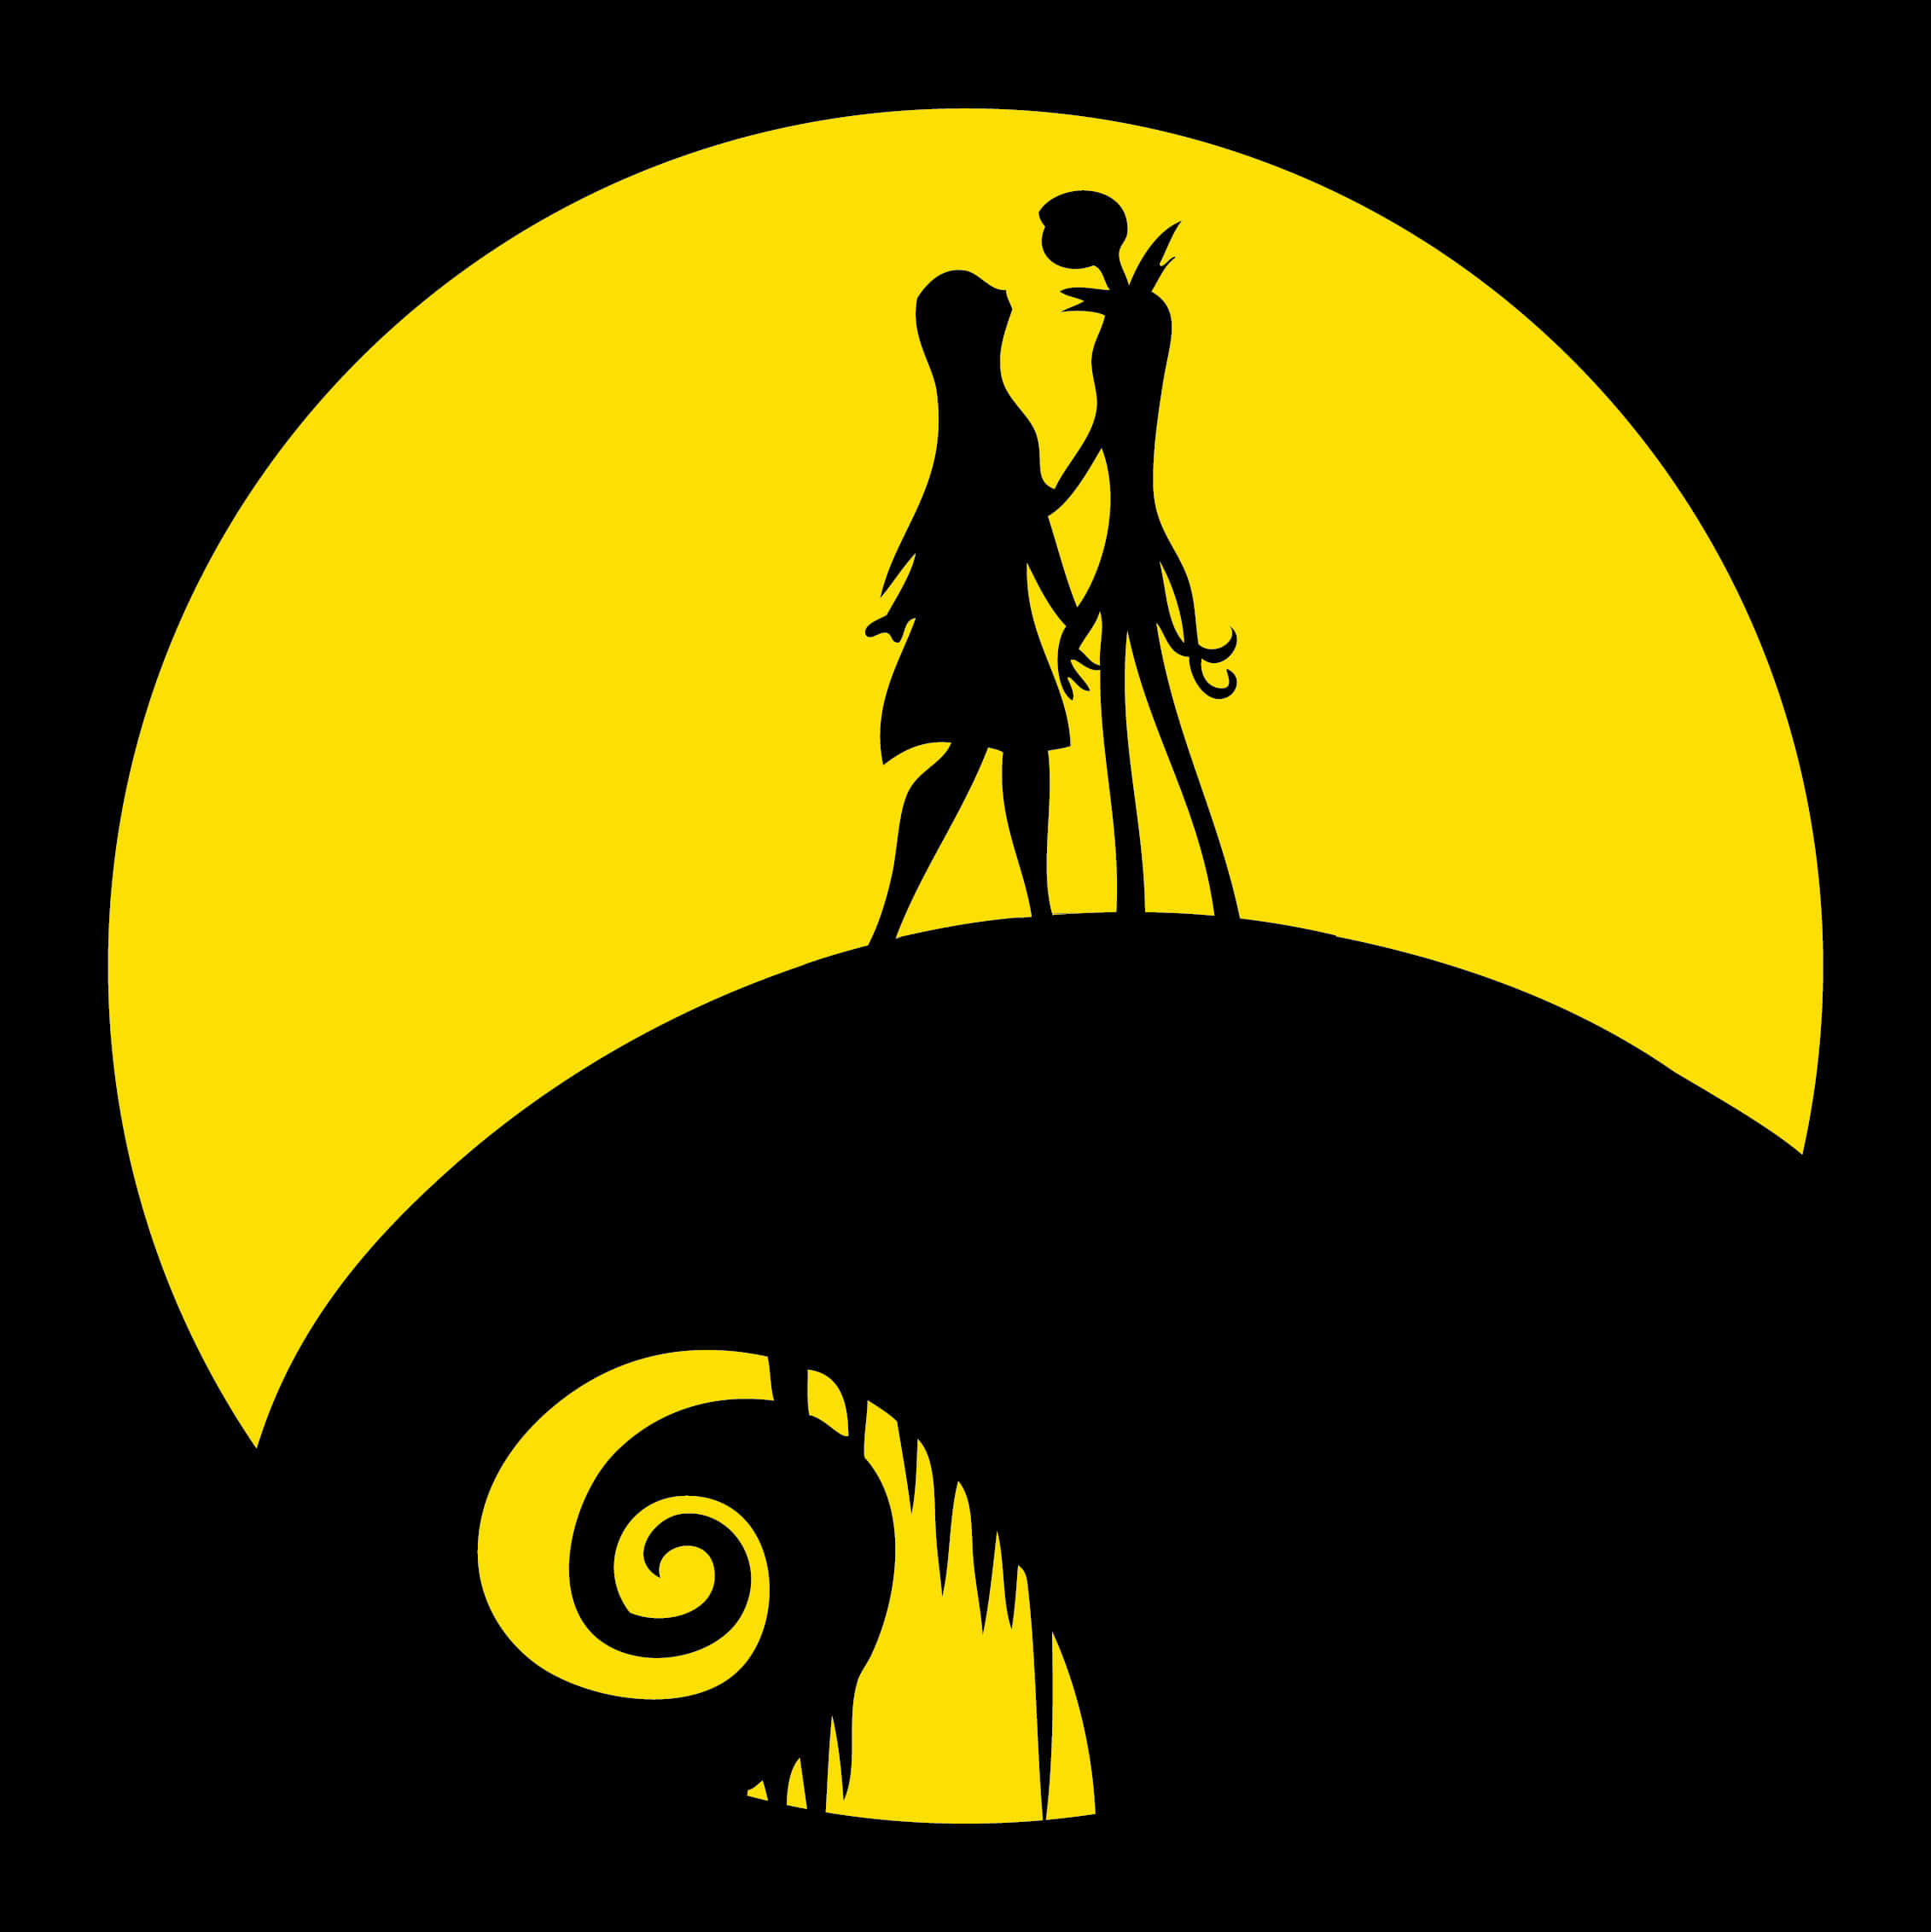 Jackand Sally Moonlight Silhouette PNG